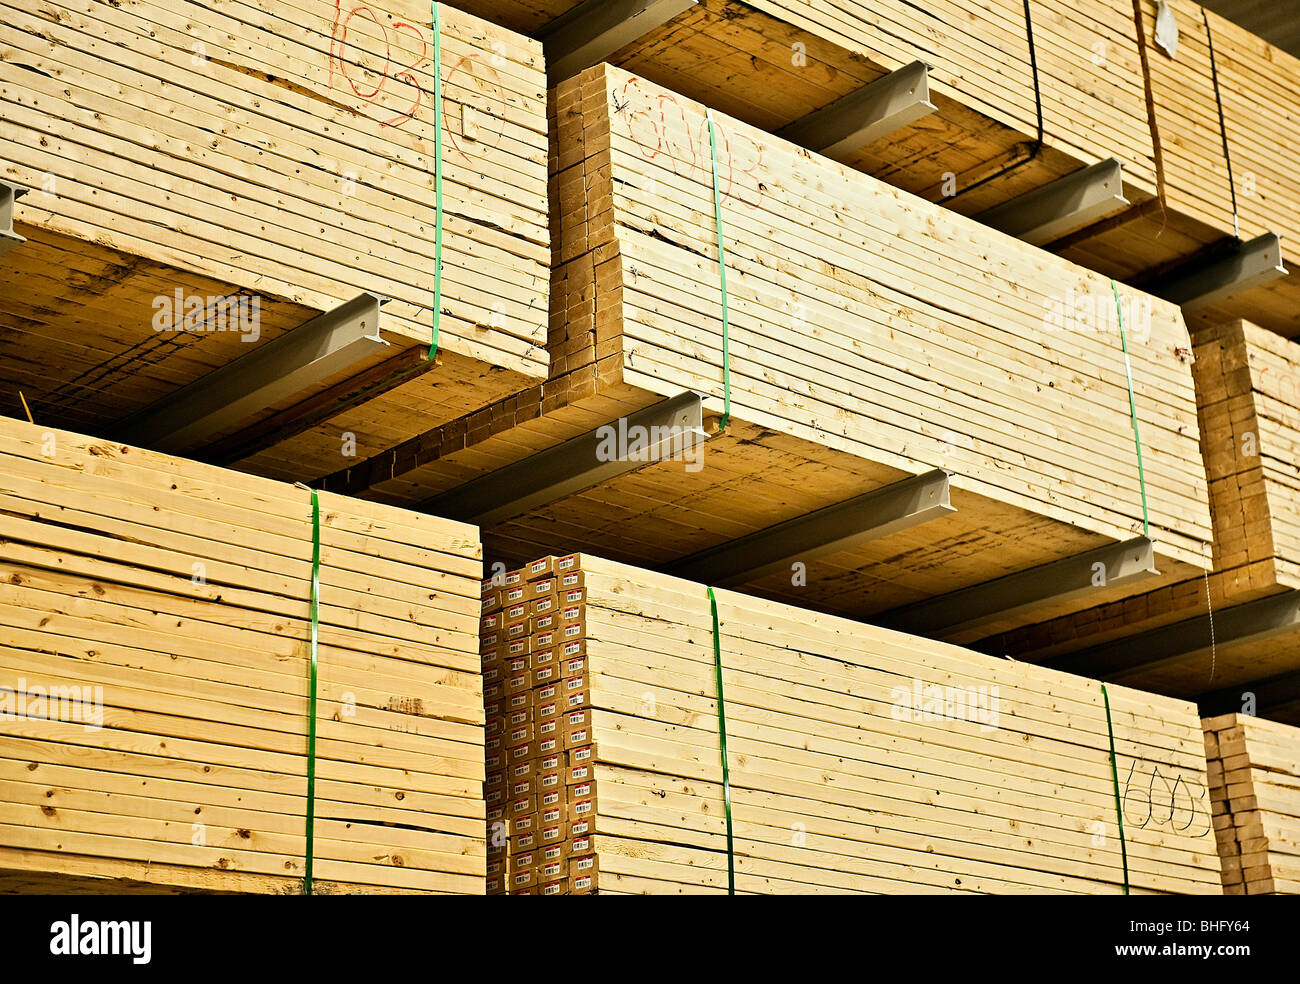 Wood building supplies. Stock Photo